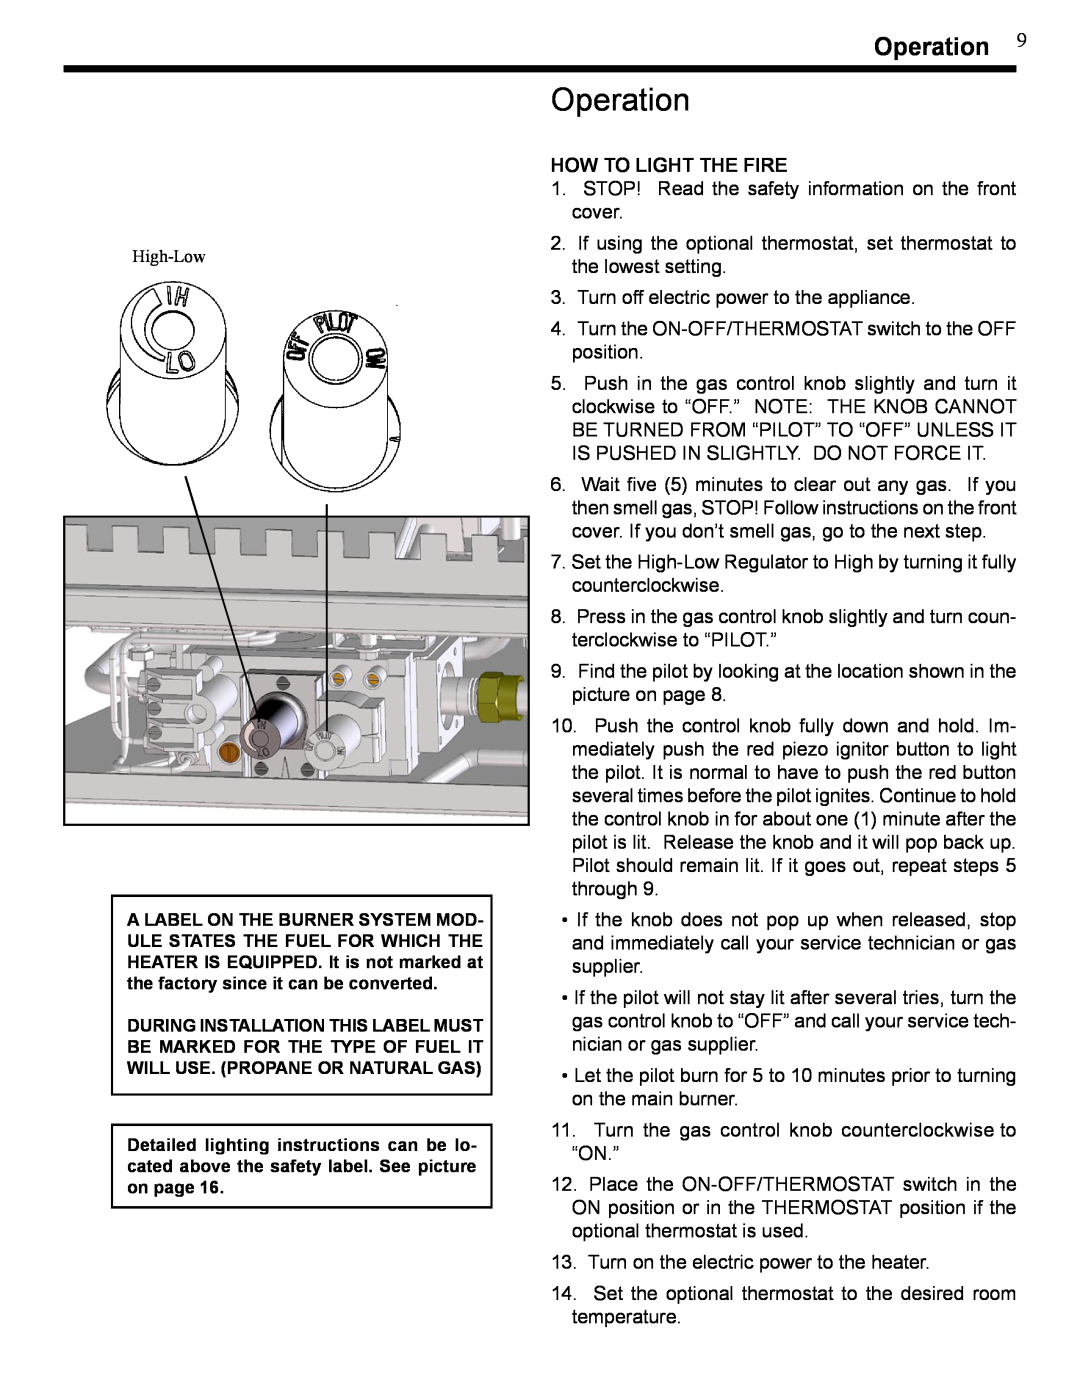 Harman Stove Company XL owner manual Operation, How To Light The Fire 